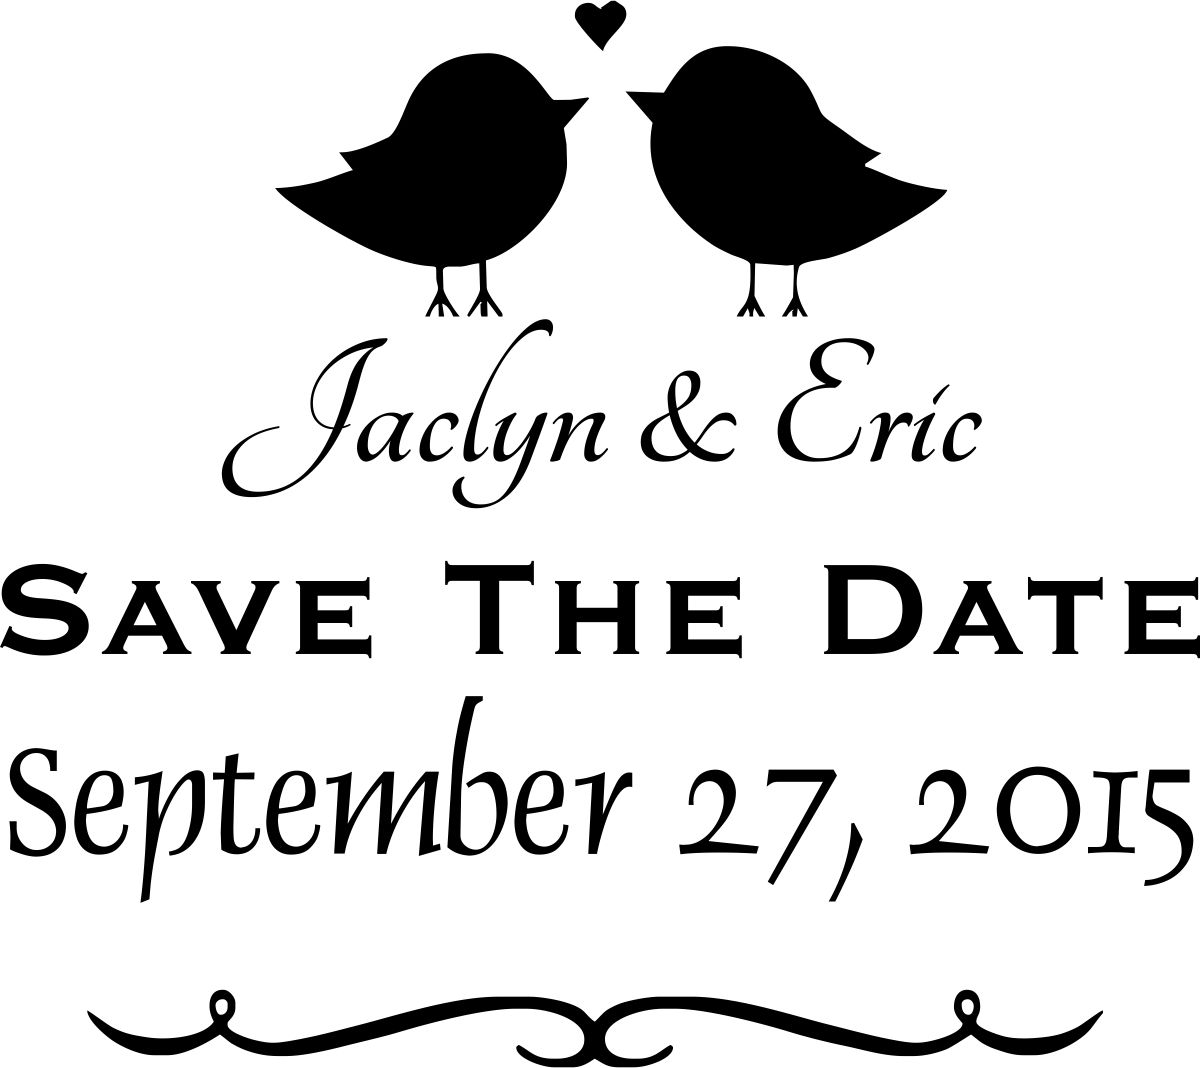 Save The Date Stamp Large - 12A